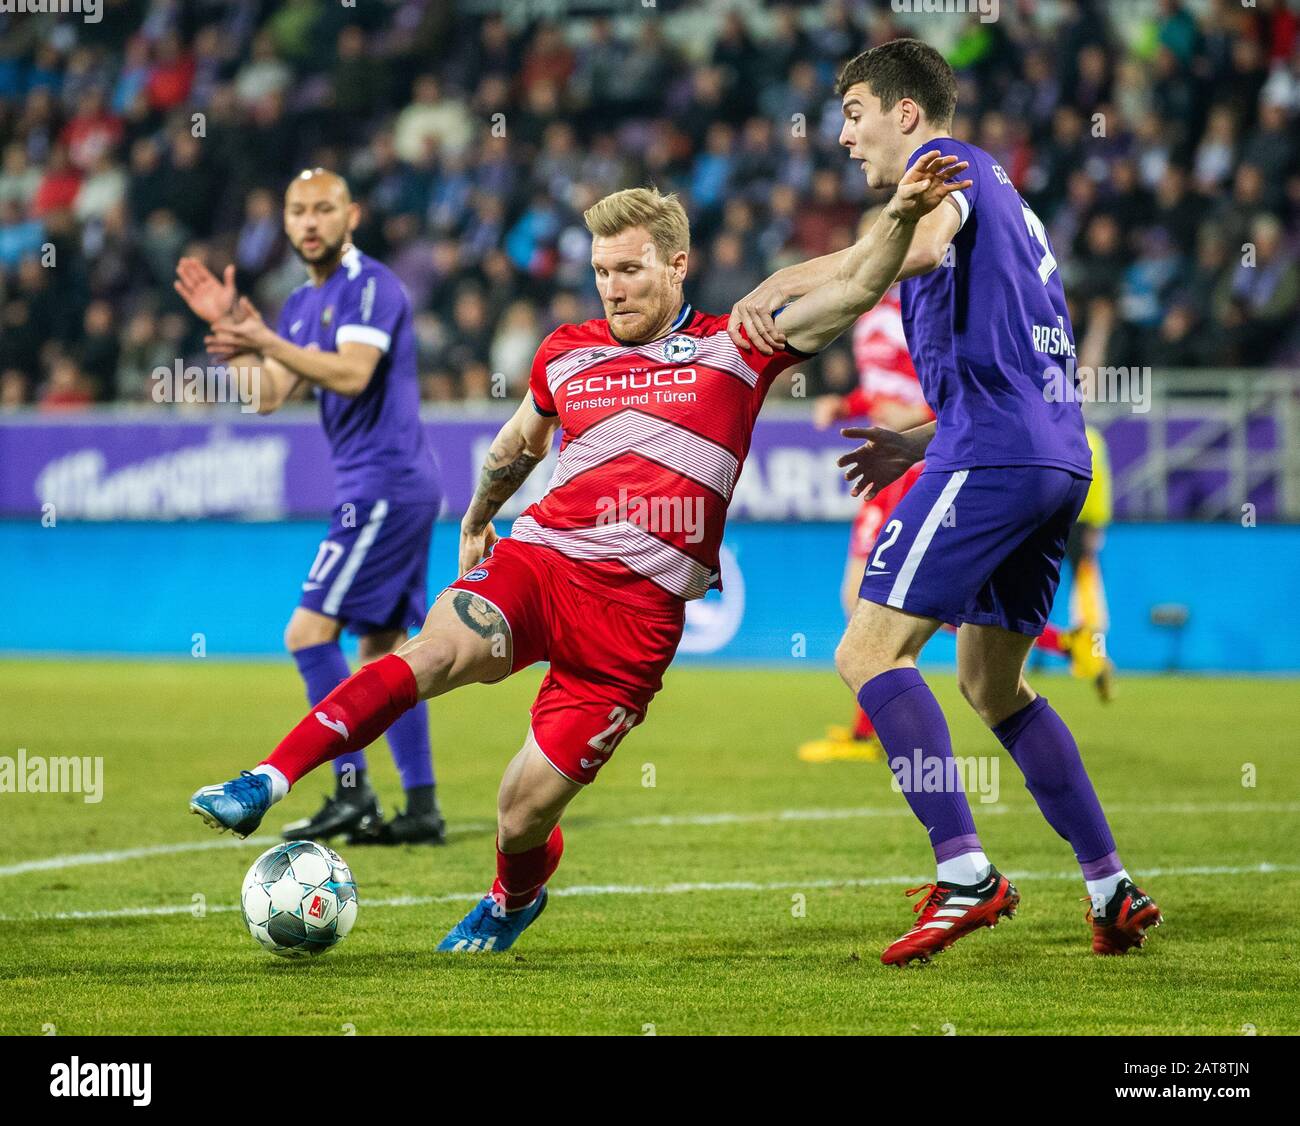 Aue, Germany. 31st Jan, 2020. Football: 2nd Bundesliga, FC Erzgebirge Aue - Arminia Bielefeld, 20th matchday, at the Sparkassen-Erzgebirgsstadion. Aues Jacob Rasmussen (r) against Bielefeld's Andreas Voglsammer. Credit: Robert Michael/dpa - IMPORTANT NOTE: In accordance with the regulations of the DFL Deutsche Fußball Liga and the DFB Deutscher Fußball-Bund, it is prohibited to exploit or have exploited in the stadium and/or from the game taken photographs in the form of sequence images and/or video-like photo series./dpa/Alamy Live News Stock Photo